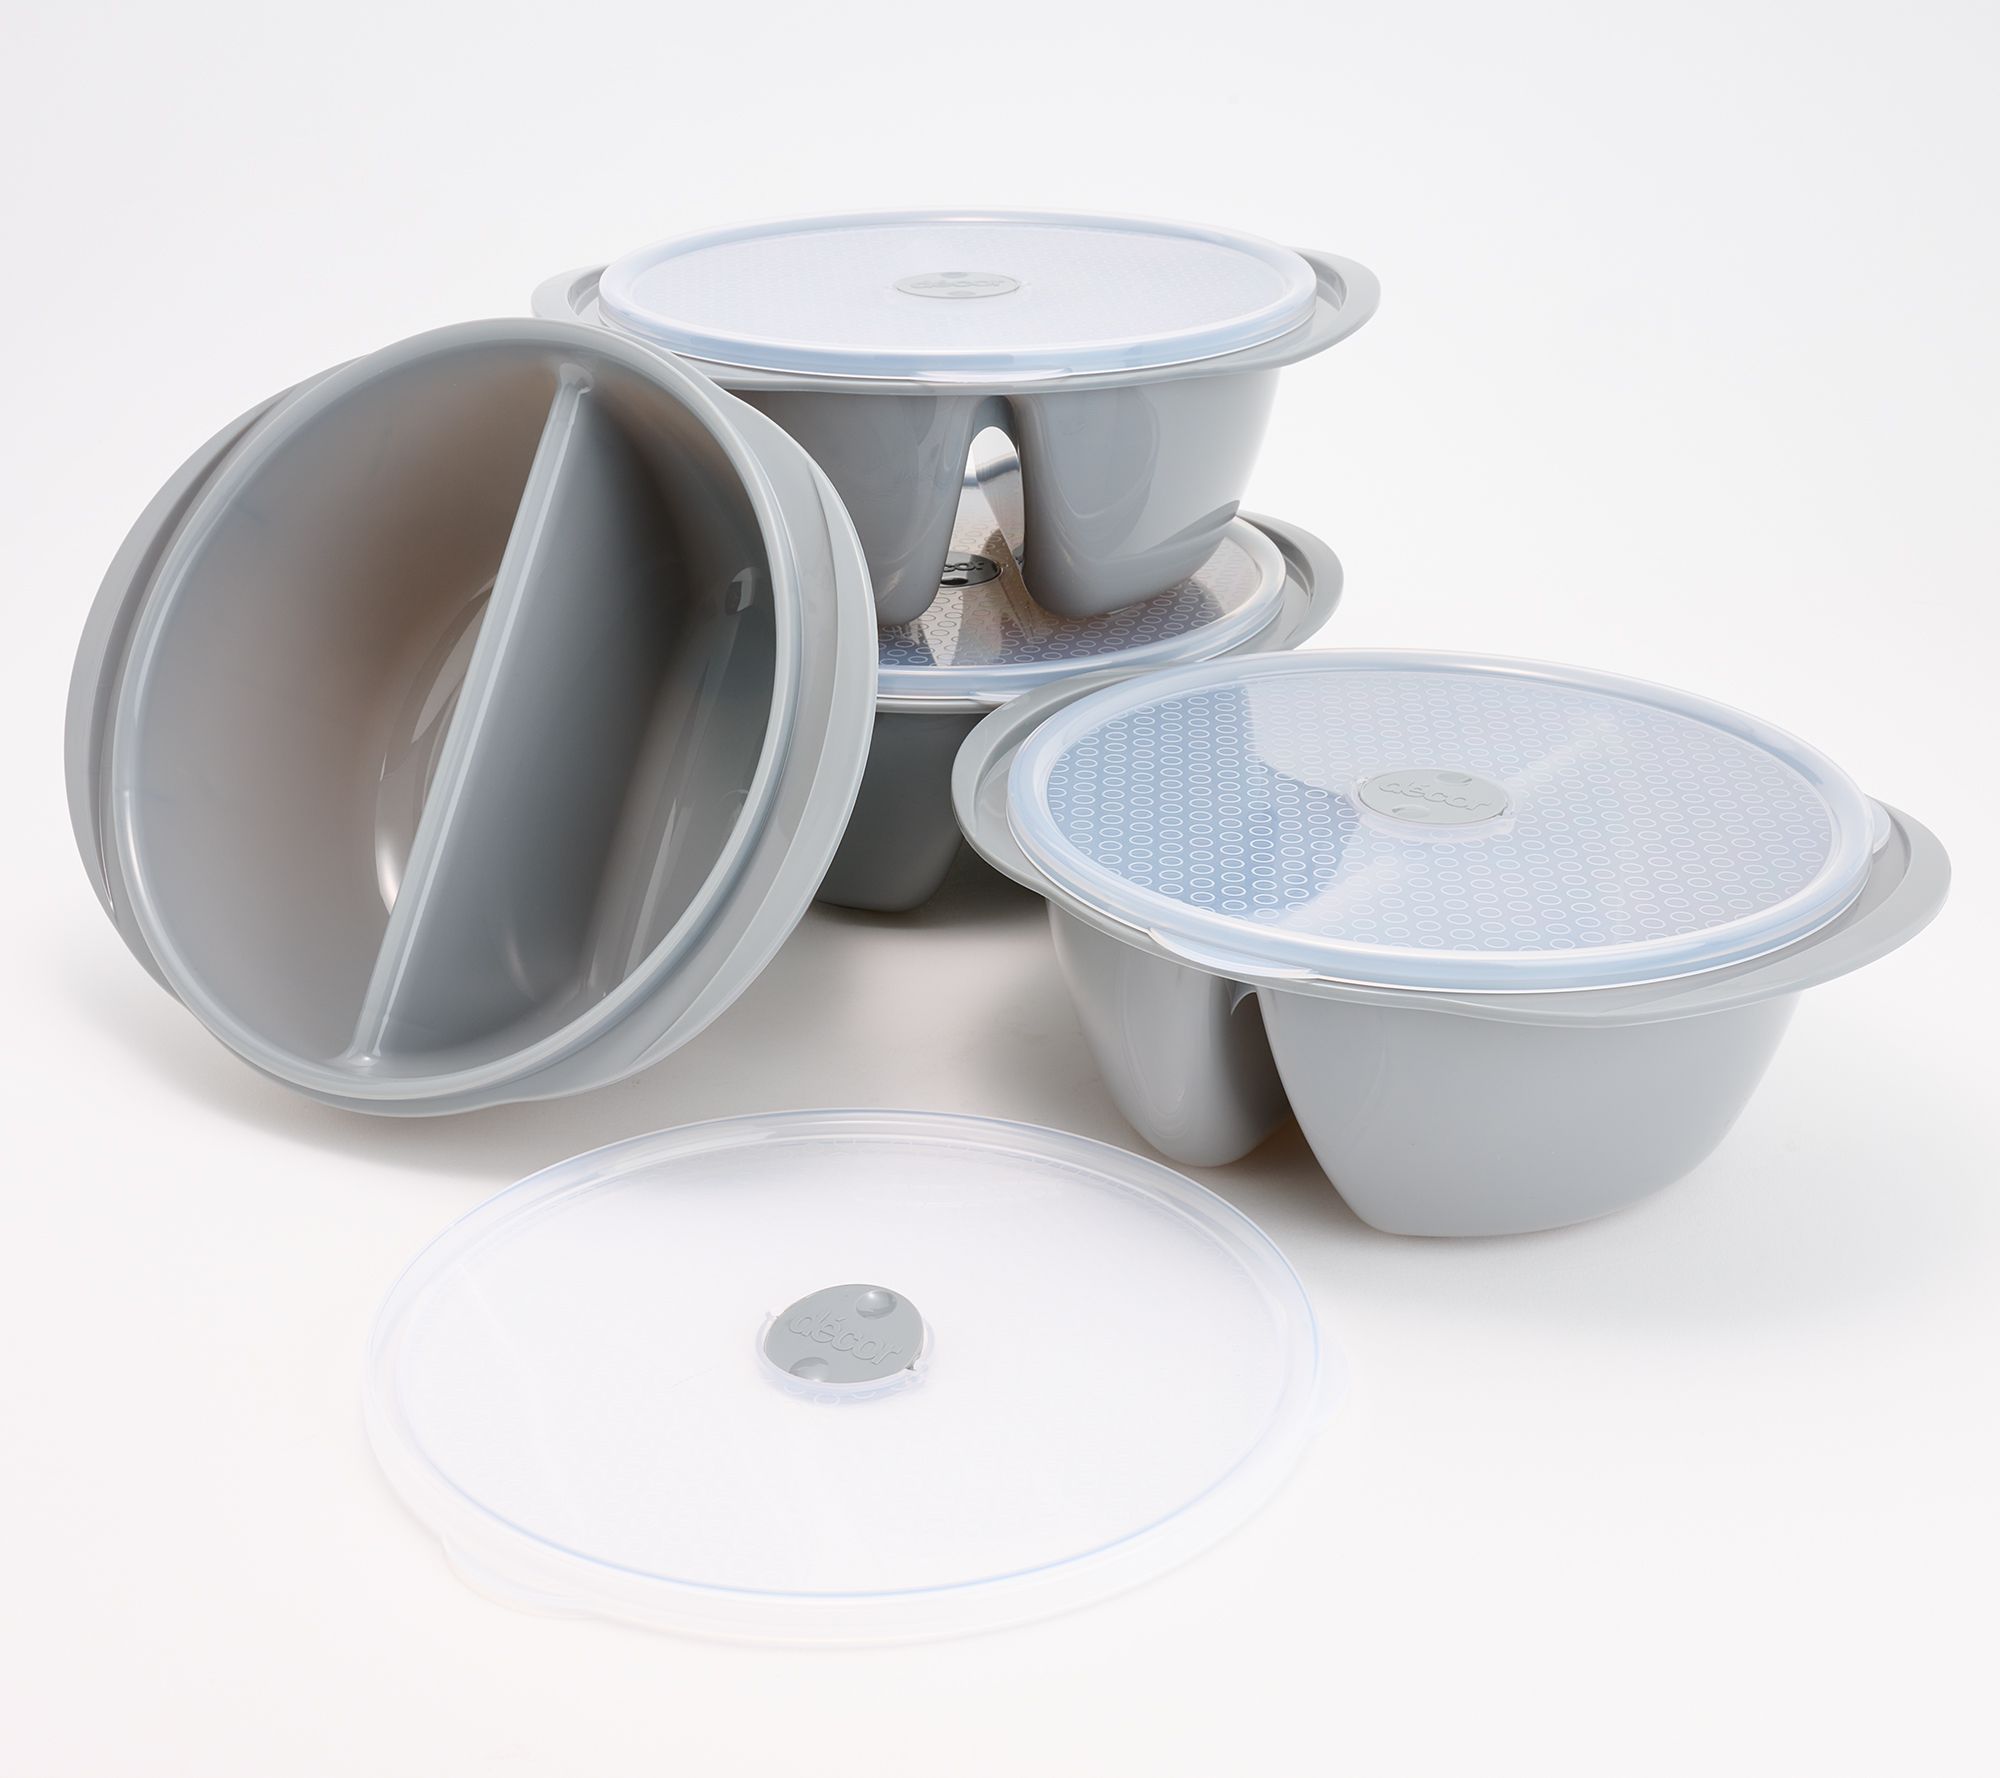 Cool-It Bowl - Insulated Bowls - Radleys